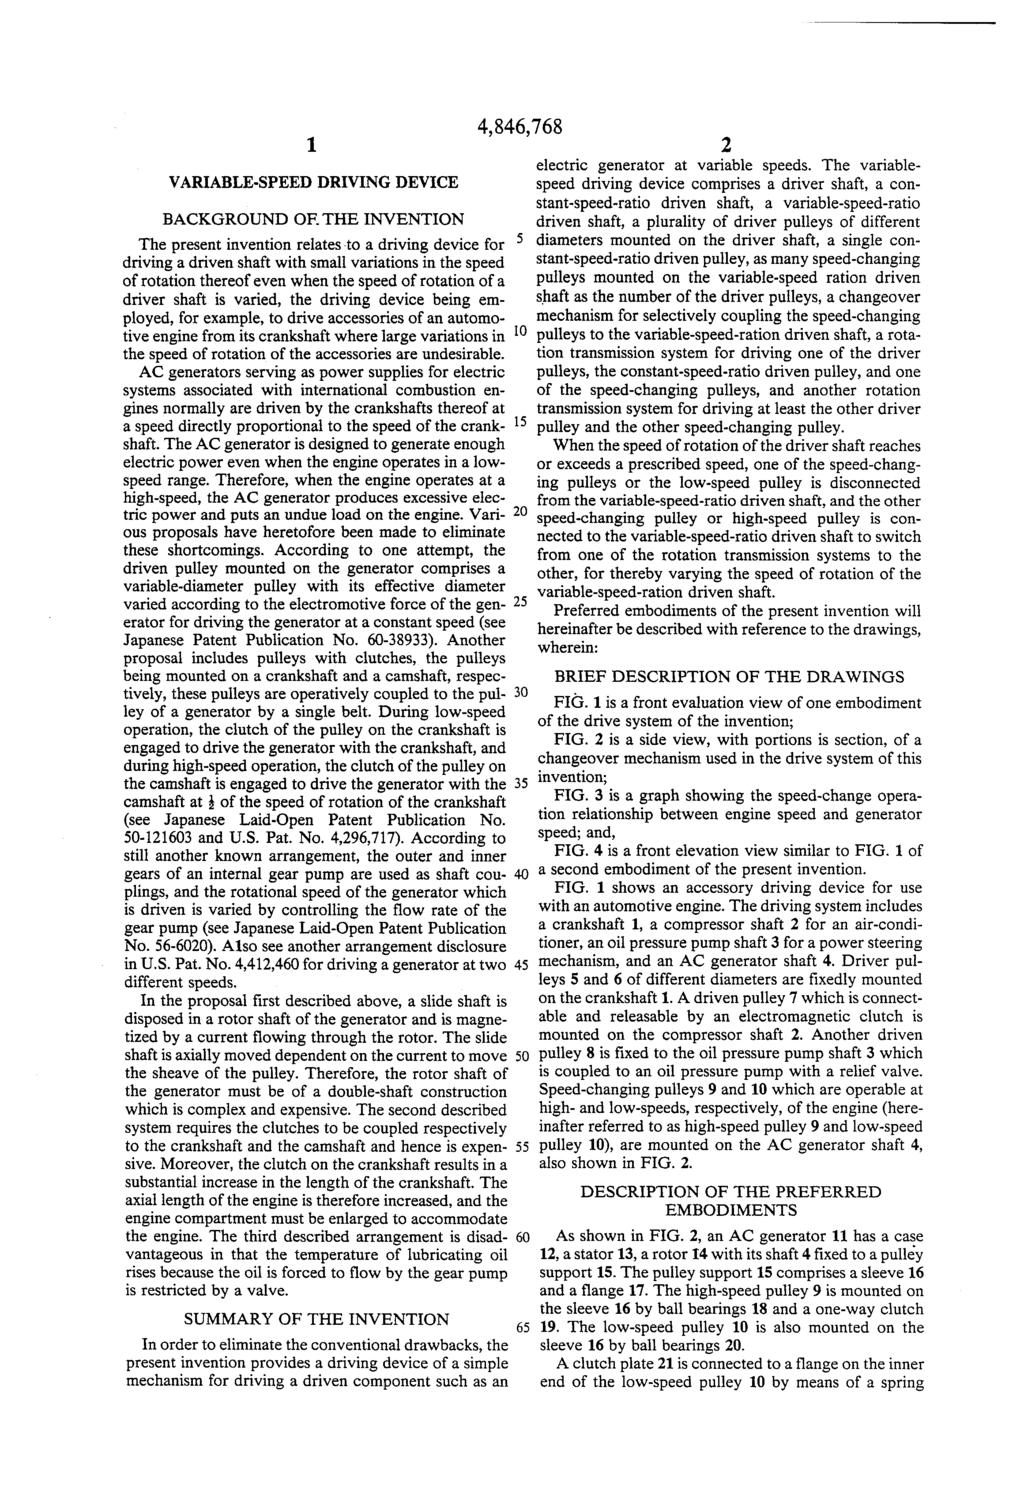 1. VARIABLE-SPEED DRIVING DEVICE BACKGROUND OF THE INVENTION The present invention relates to a driving device for driving a driven shaft with small variations in the speed of rotation thereof even